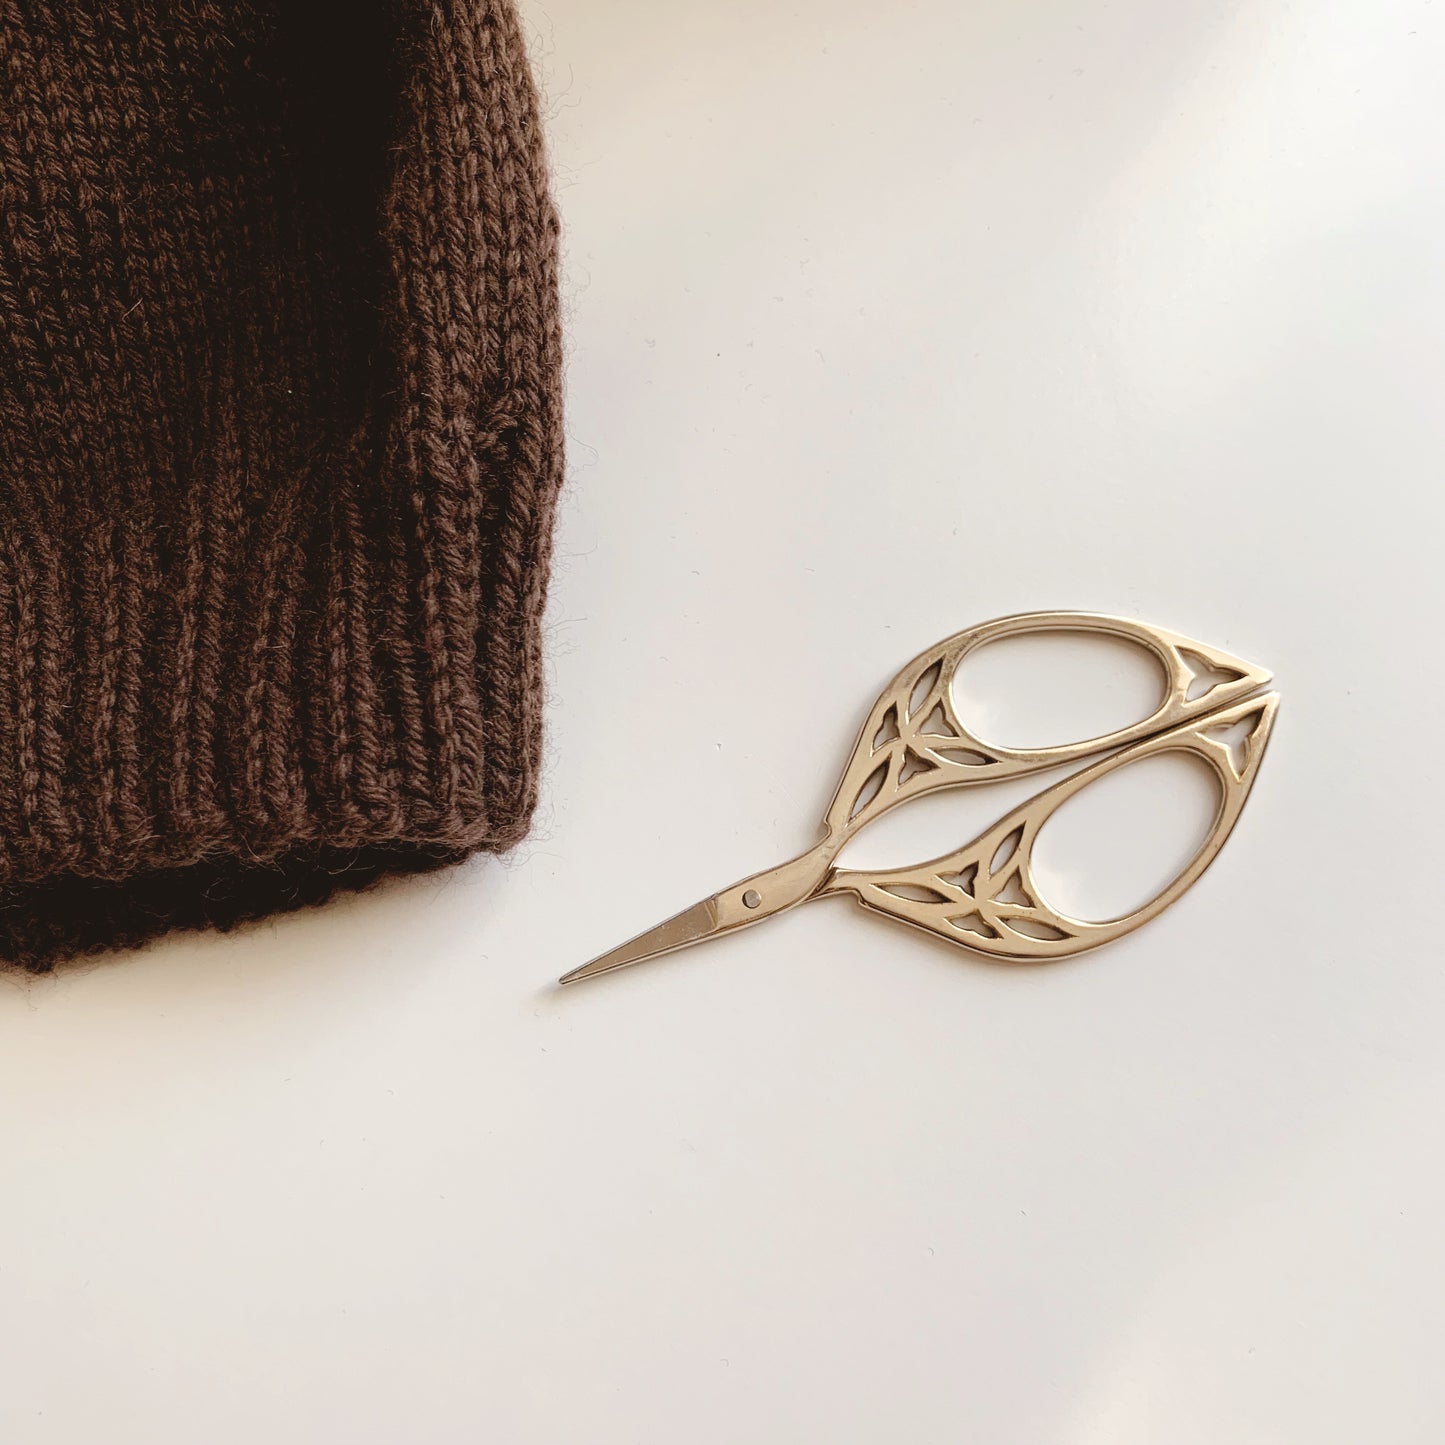 Galadriel Antiqued Gold Stainless Steel Embroidery Scissors